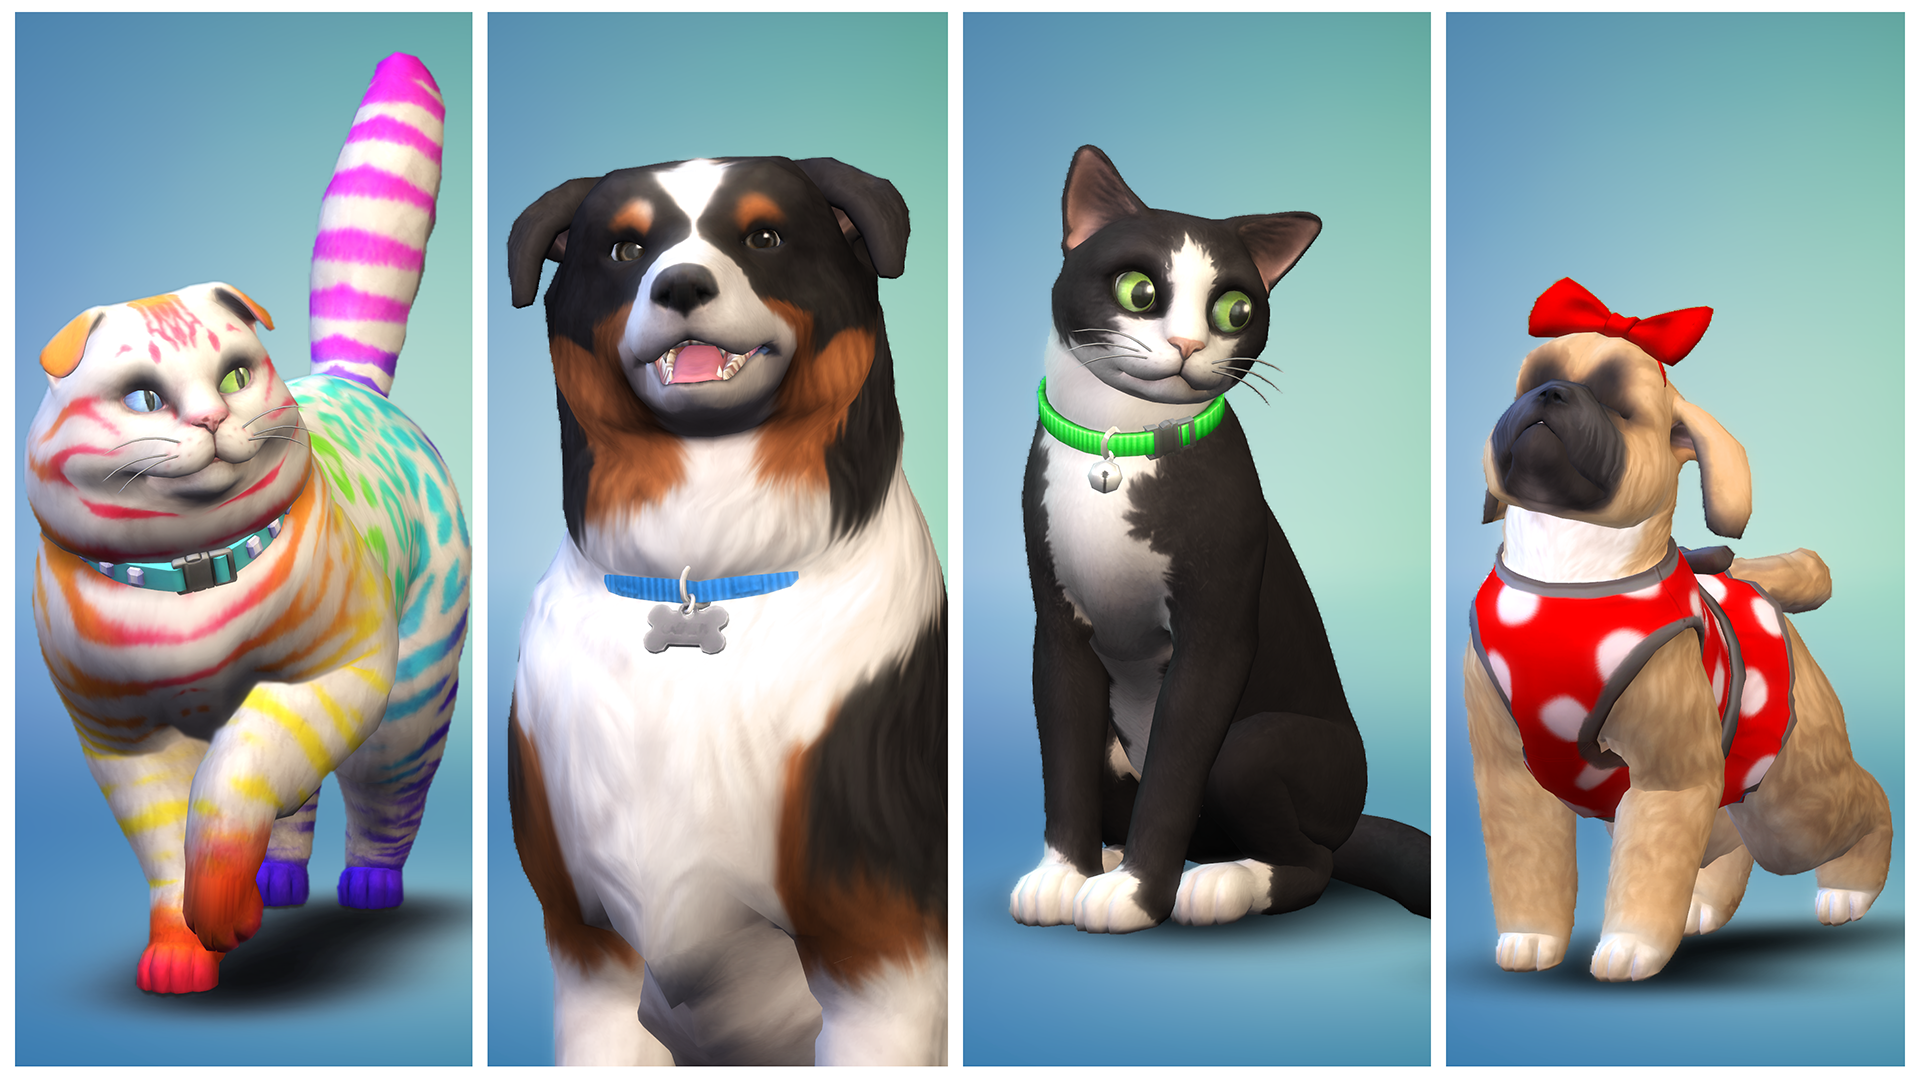 The Sims 4 Cats  Dogs releases in November. 